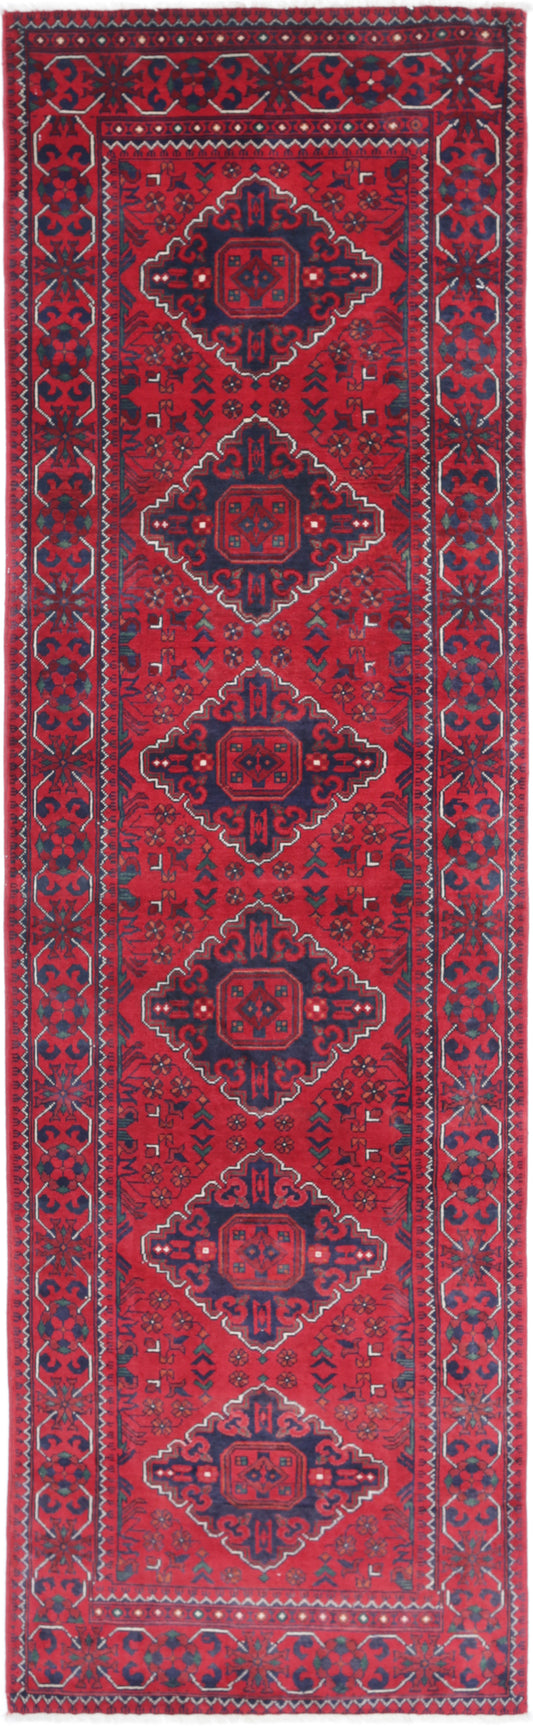 Tribal Hand Knotted Afghan Khamyab Wool Rug of Size 2'6'' X 9'0'' in Red and Red Colors - Made in Afghanistan